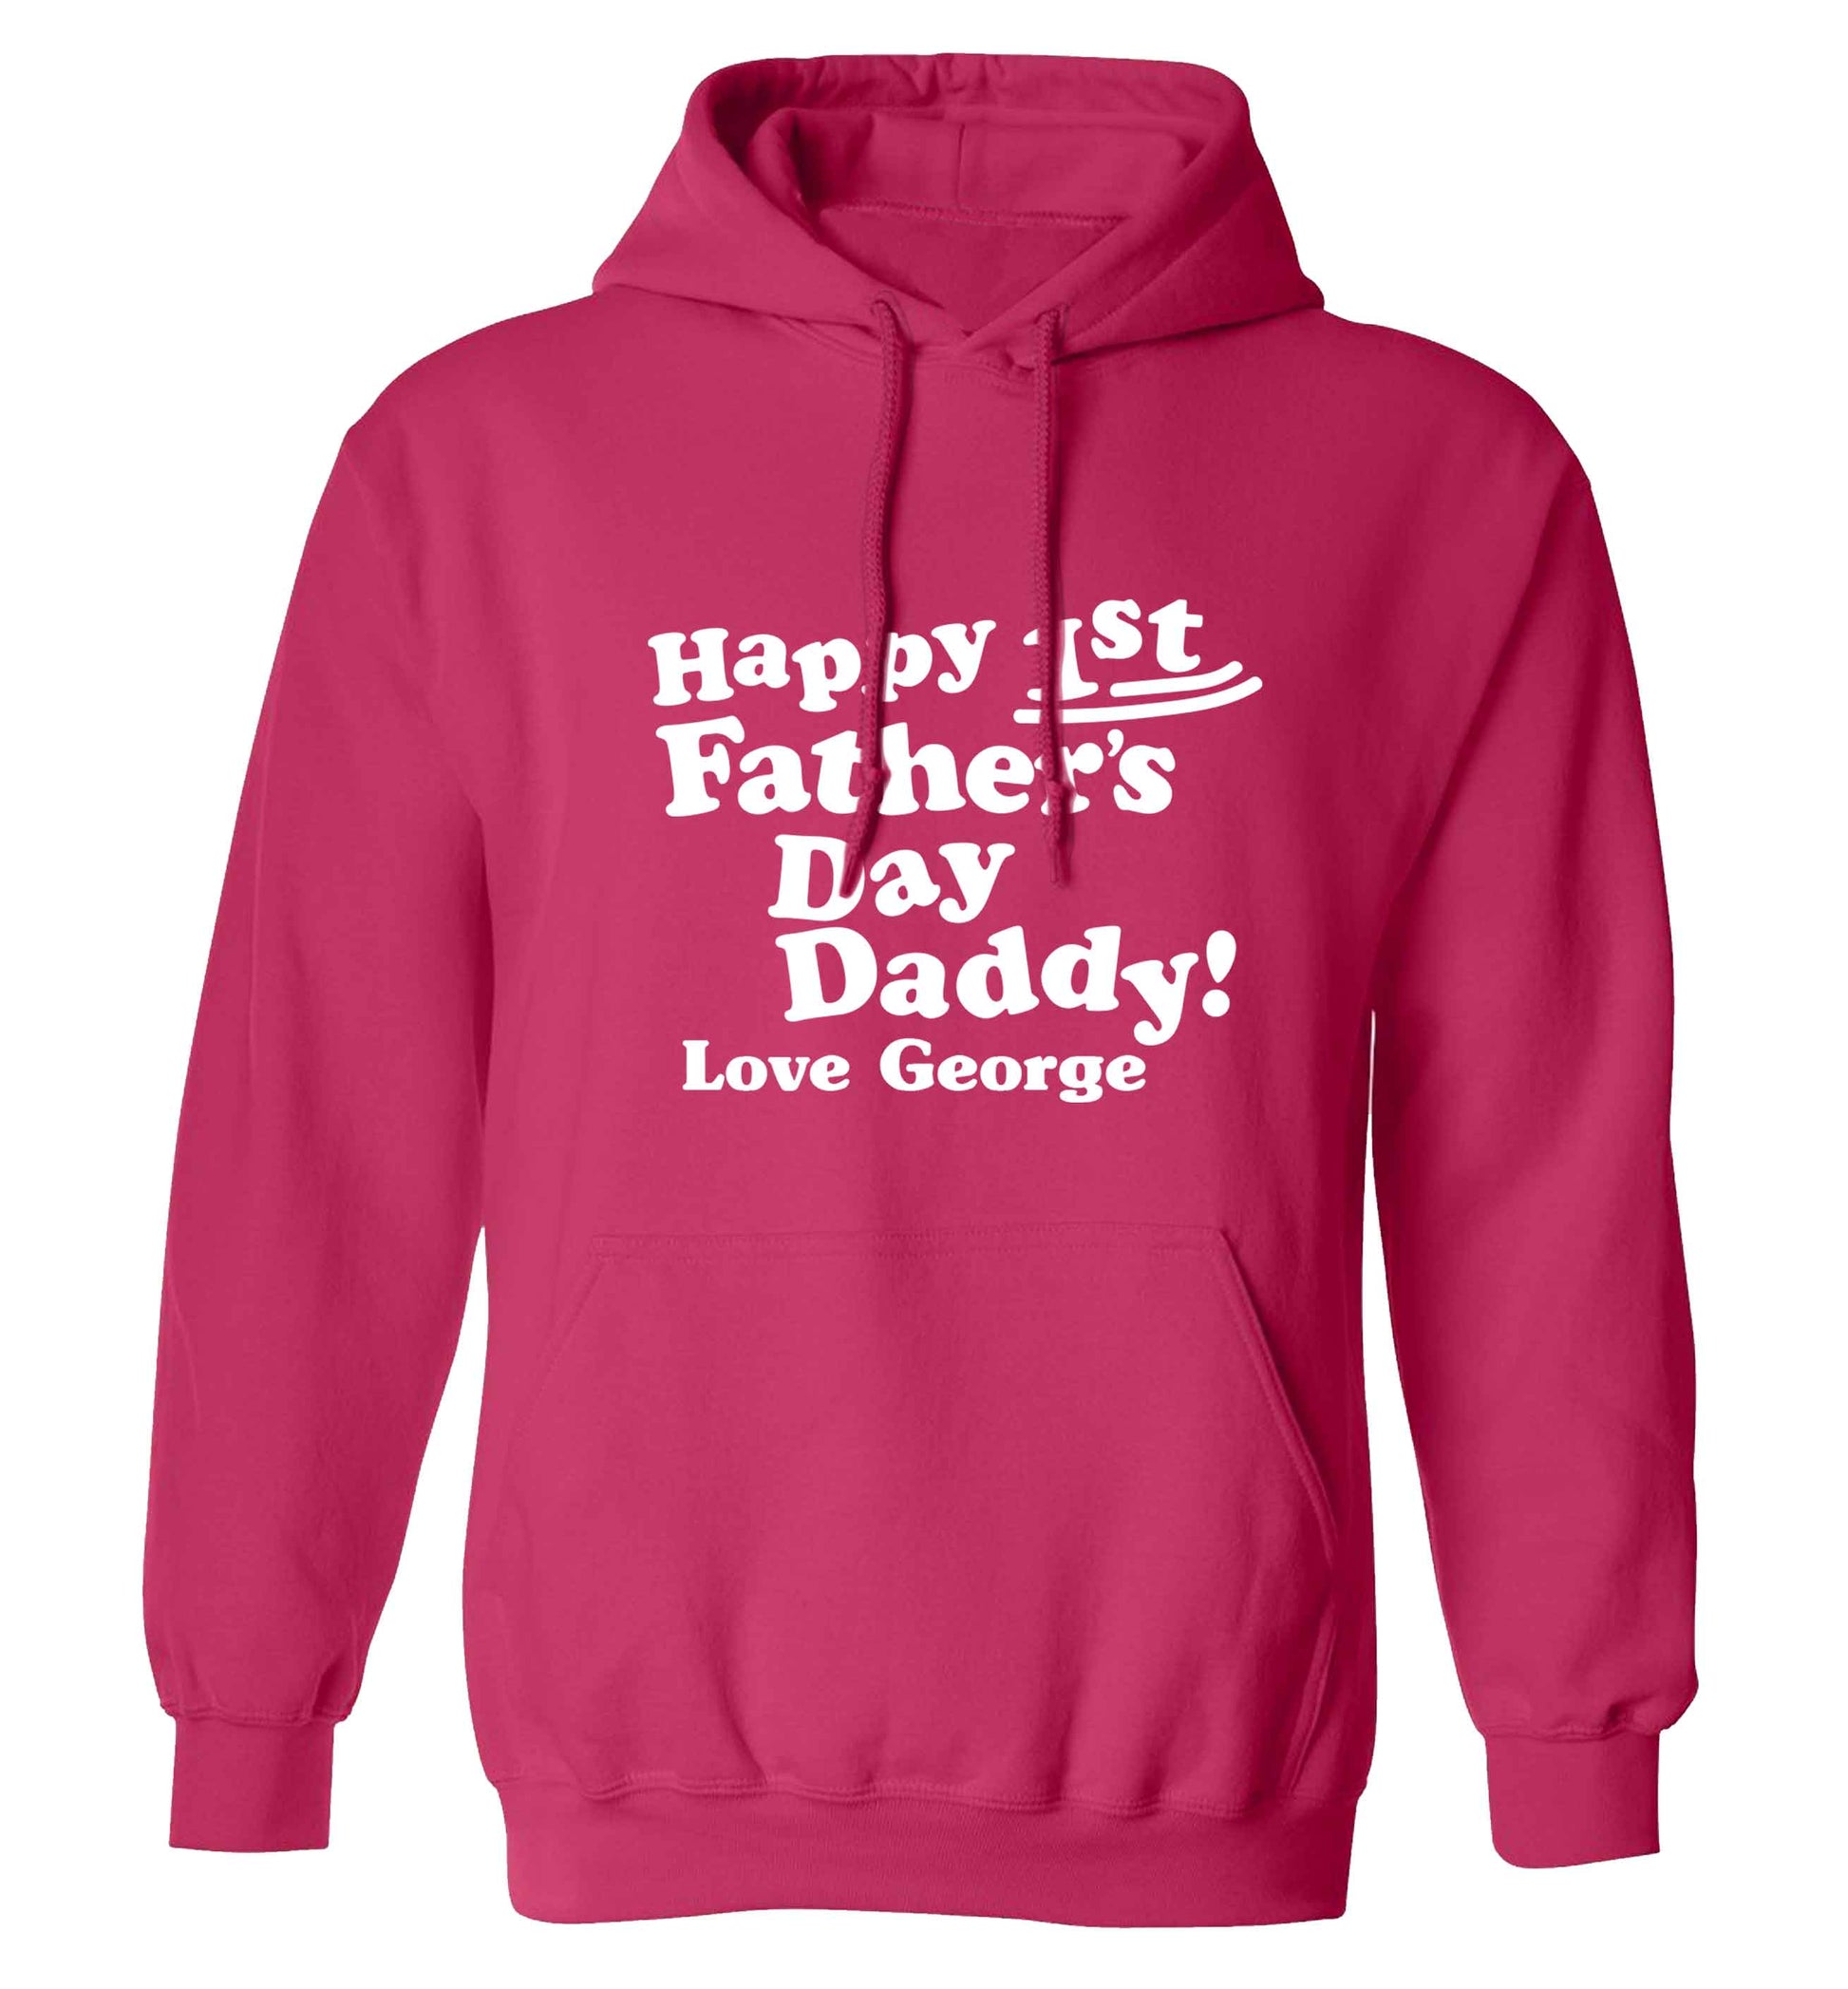 Personalised Happy first father's day daddy  adults unisex pink hoodie 2XL